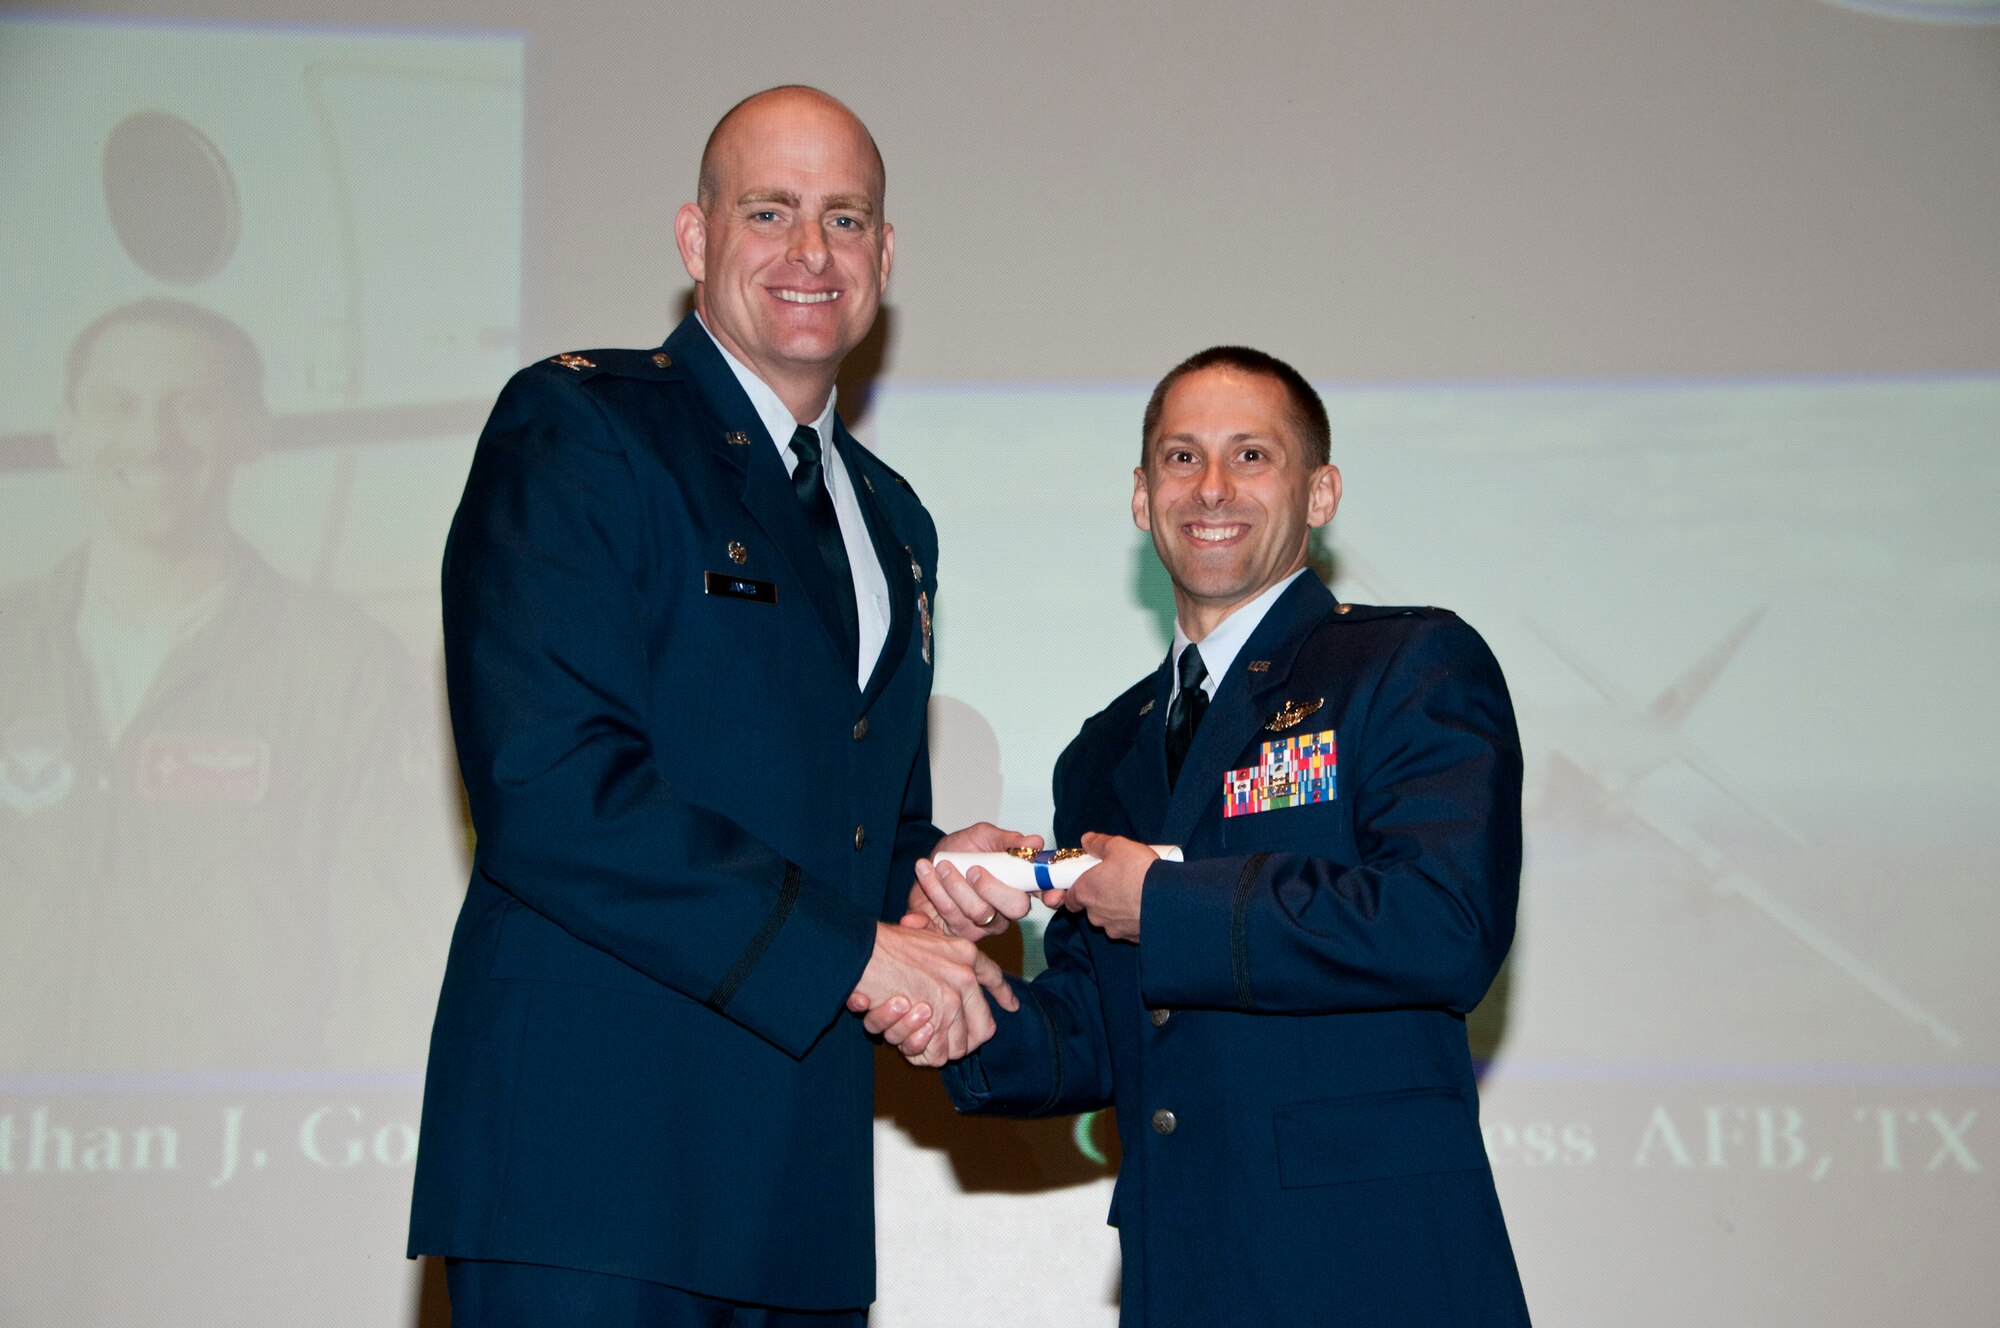 Then 2nd Lt. Jonathan Golden receives his Air Force Pilot rating from Col. Darren James at the base theater at Vance Air Force Base, Oklahoma, April 5, 2013. Capt. Golden died in a C-130J crash in Jalalabad, Afghanistan, Oct. 2. James served as the 71st Flying Training Wing commander from 2012 to 2014. (U.S. Air Force photo / Terry Wasson)